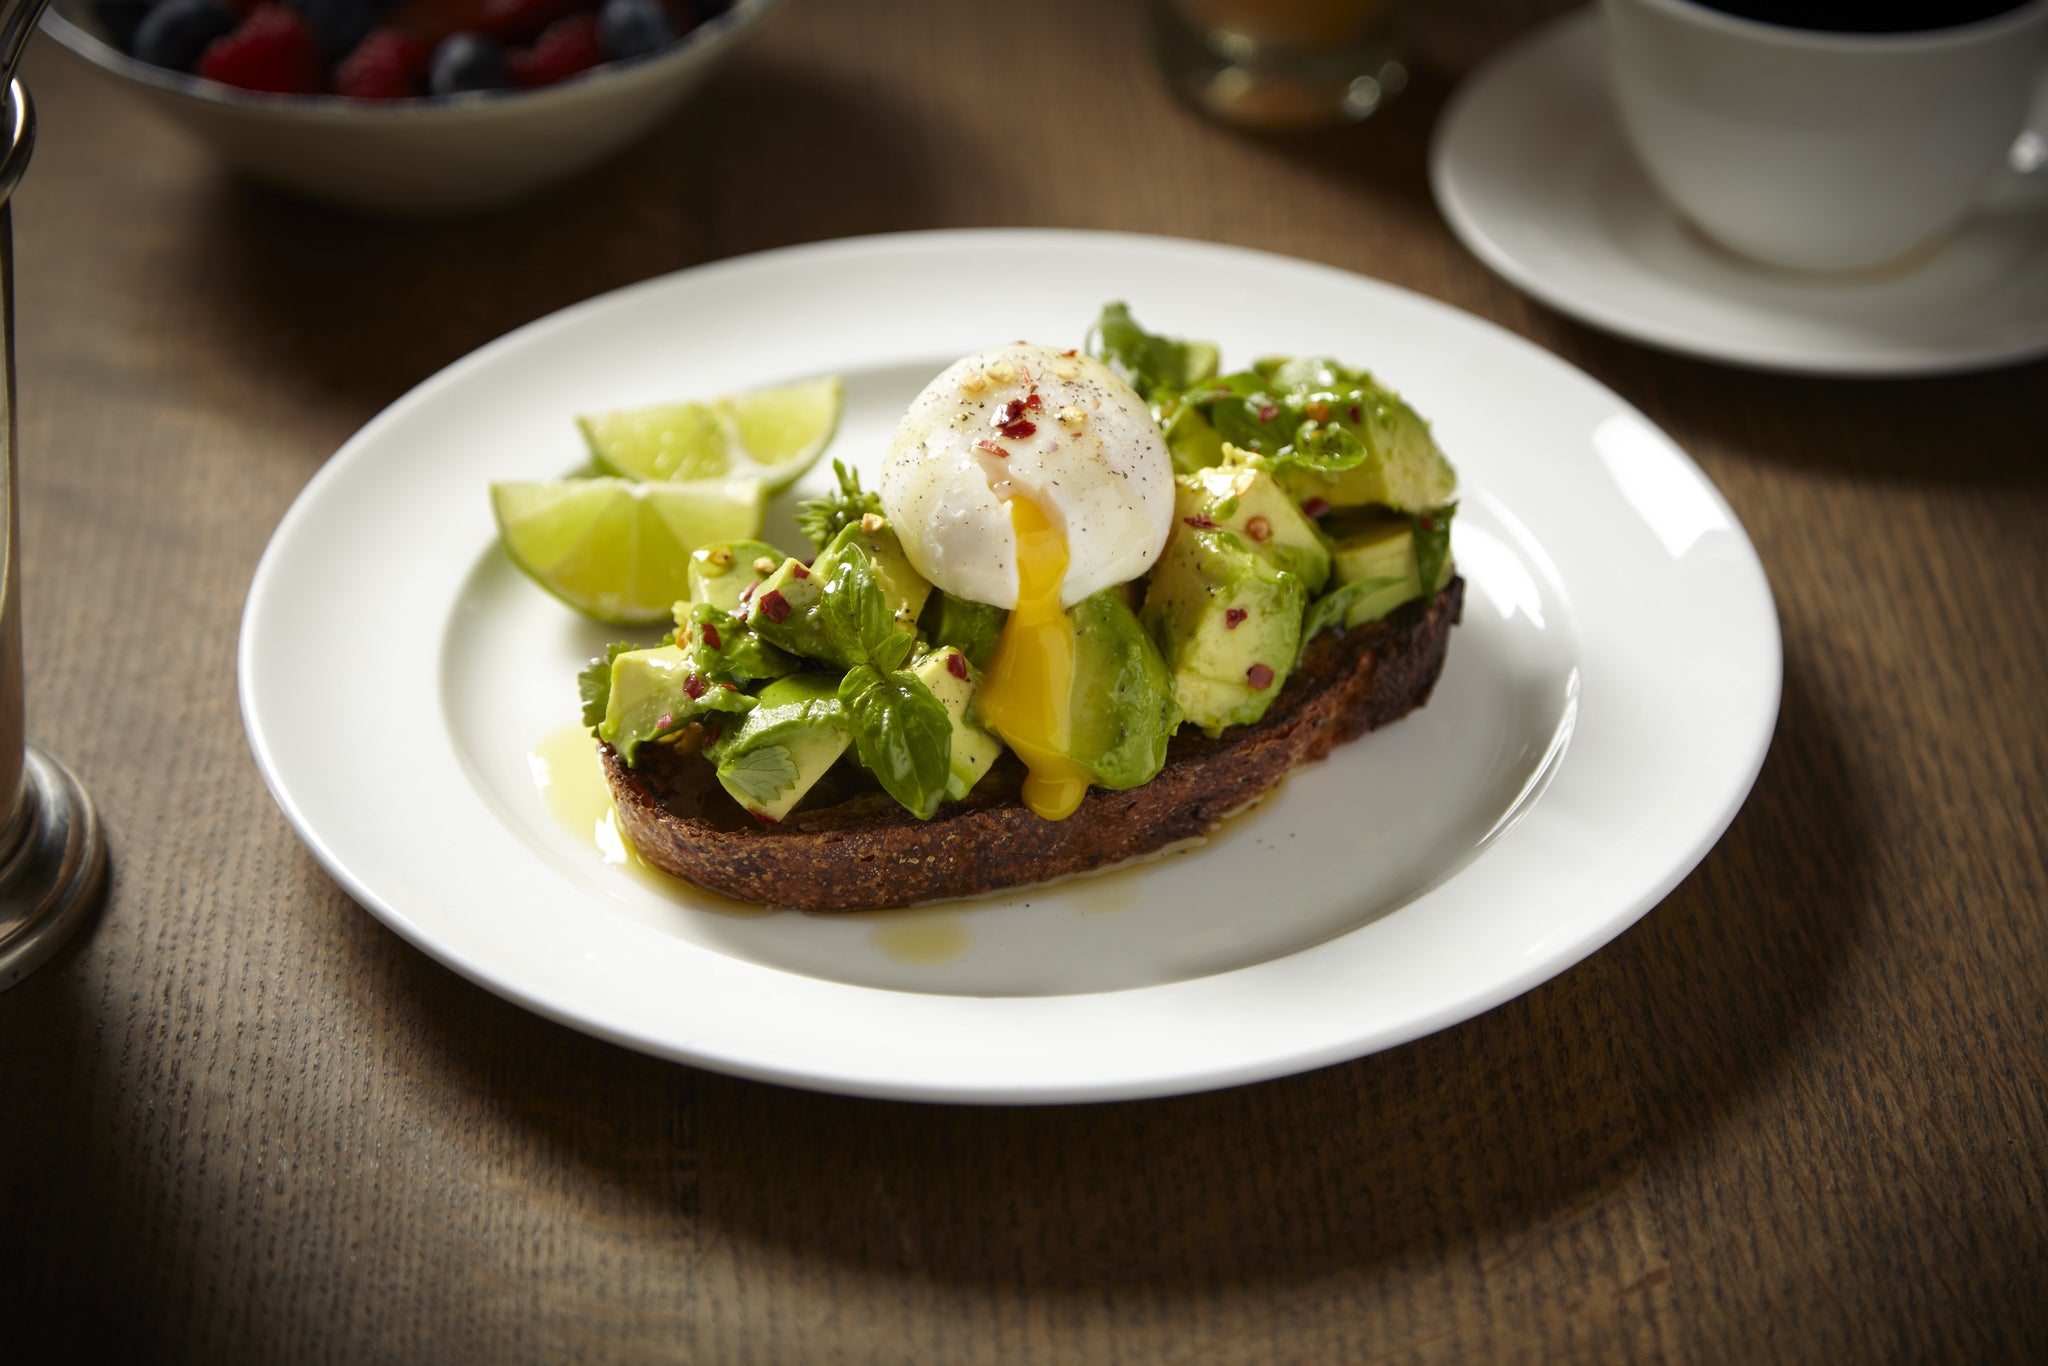 Avocado and poached egg on toast